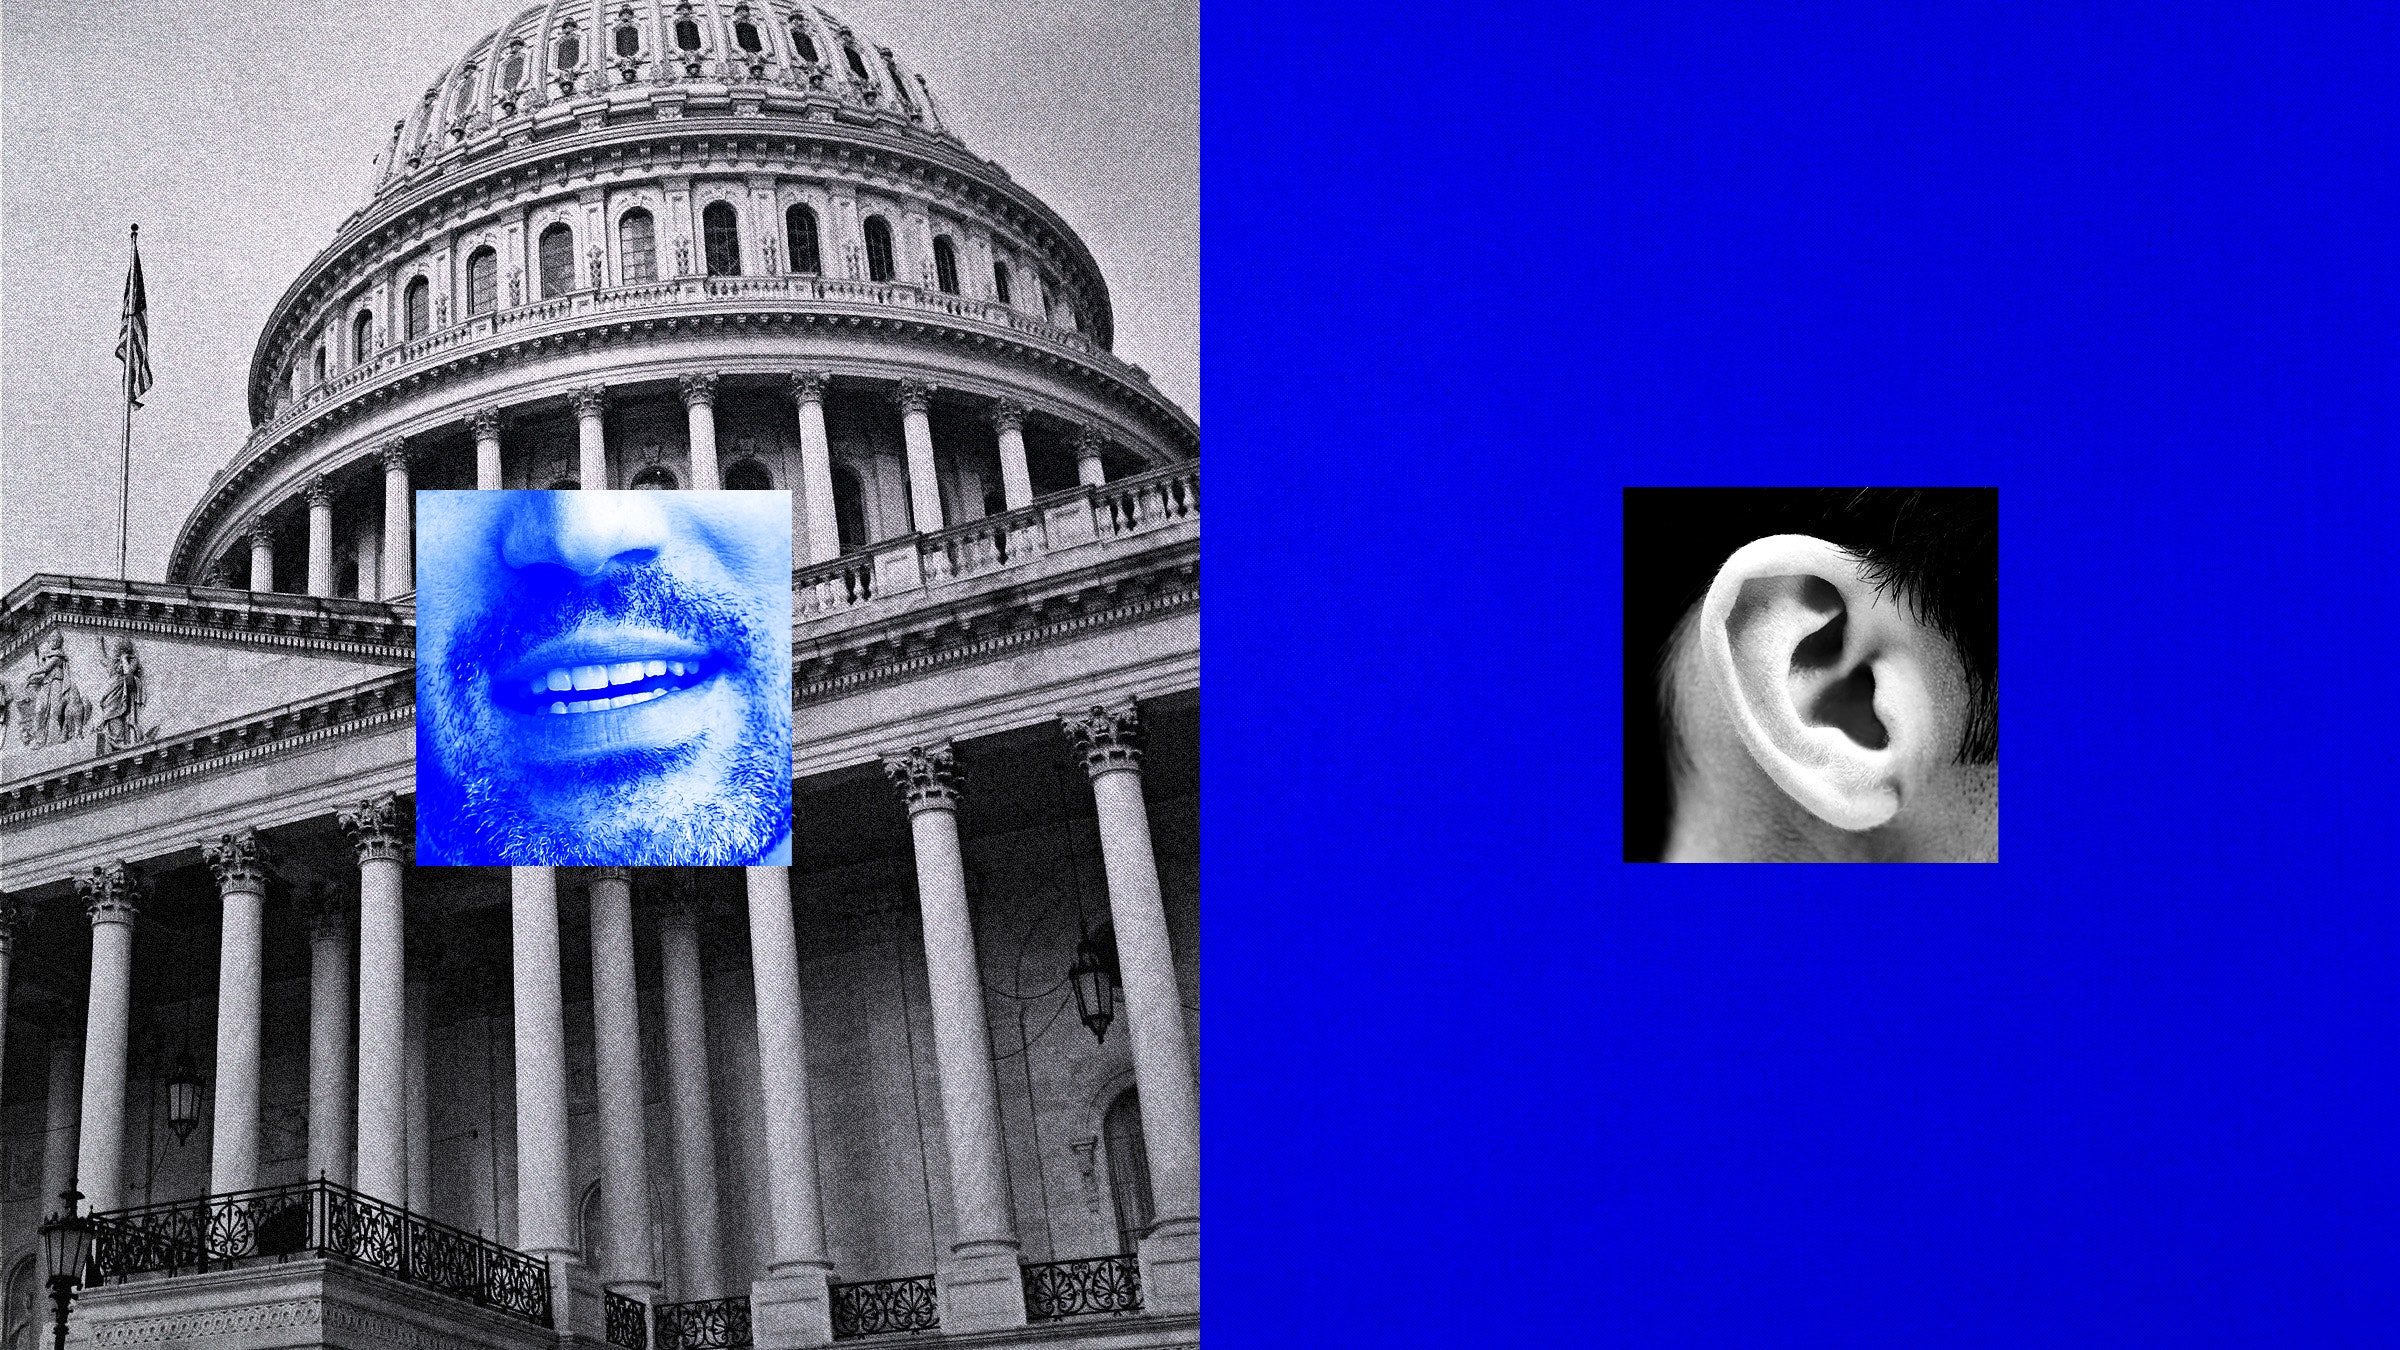 Collage of the U.S. Capitol building a talking mouth and a listening ear